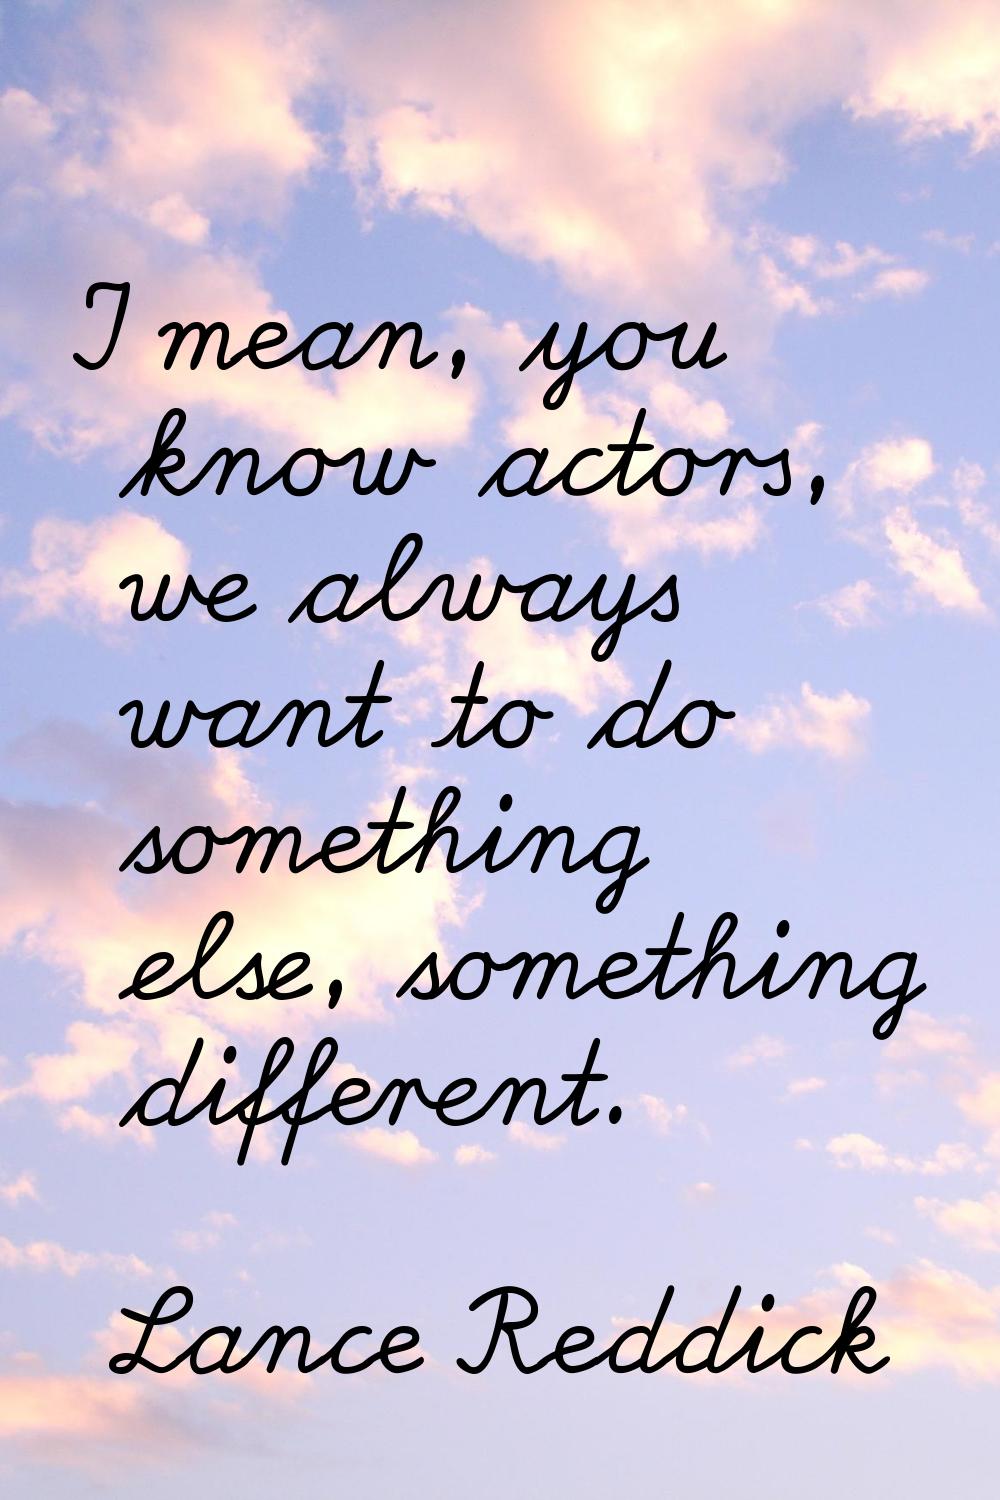 I mean, you know actors, we always want to do something else, something different.